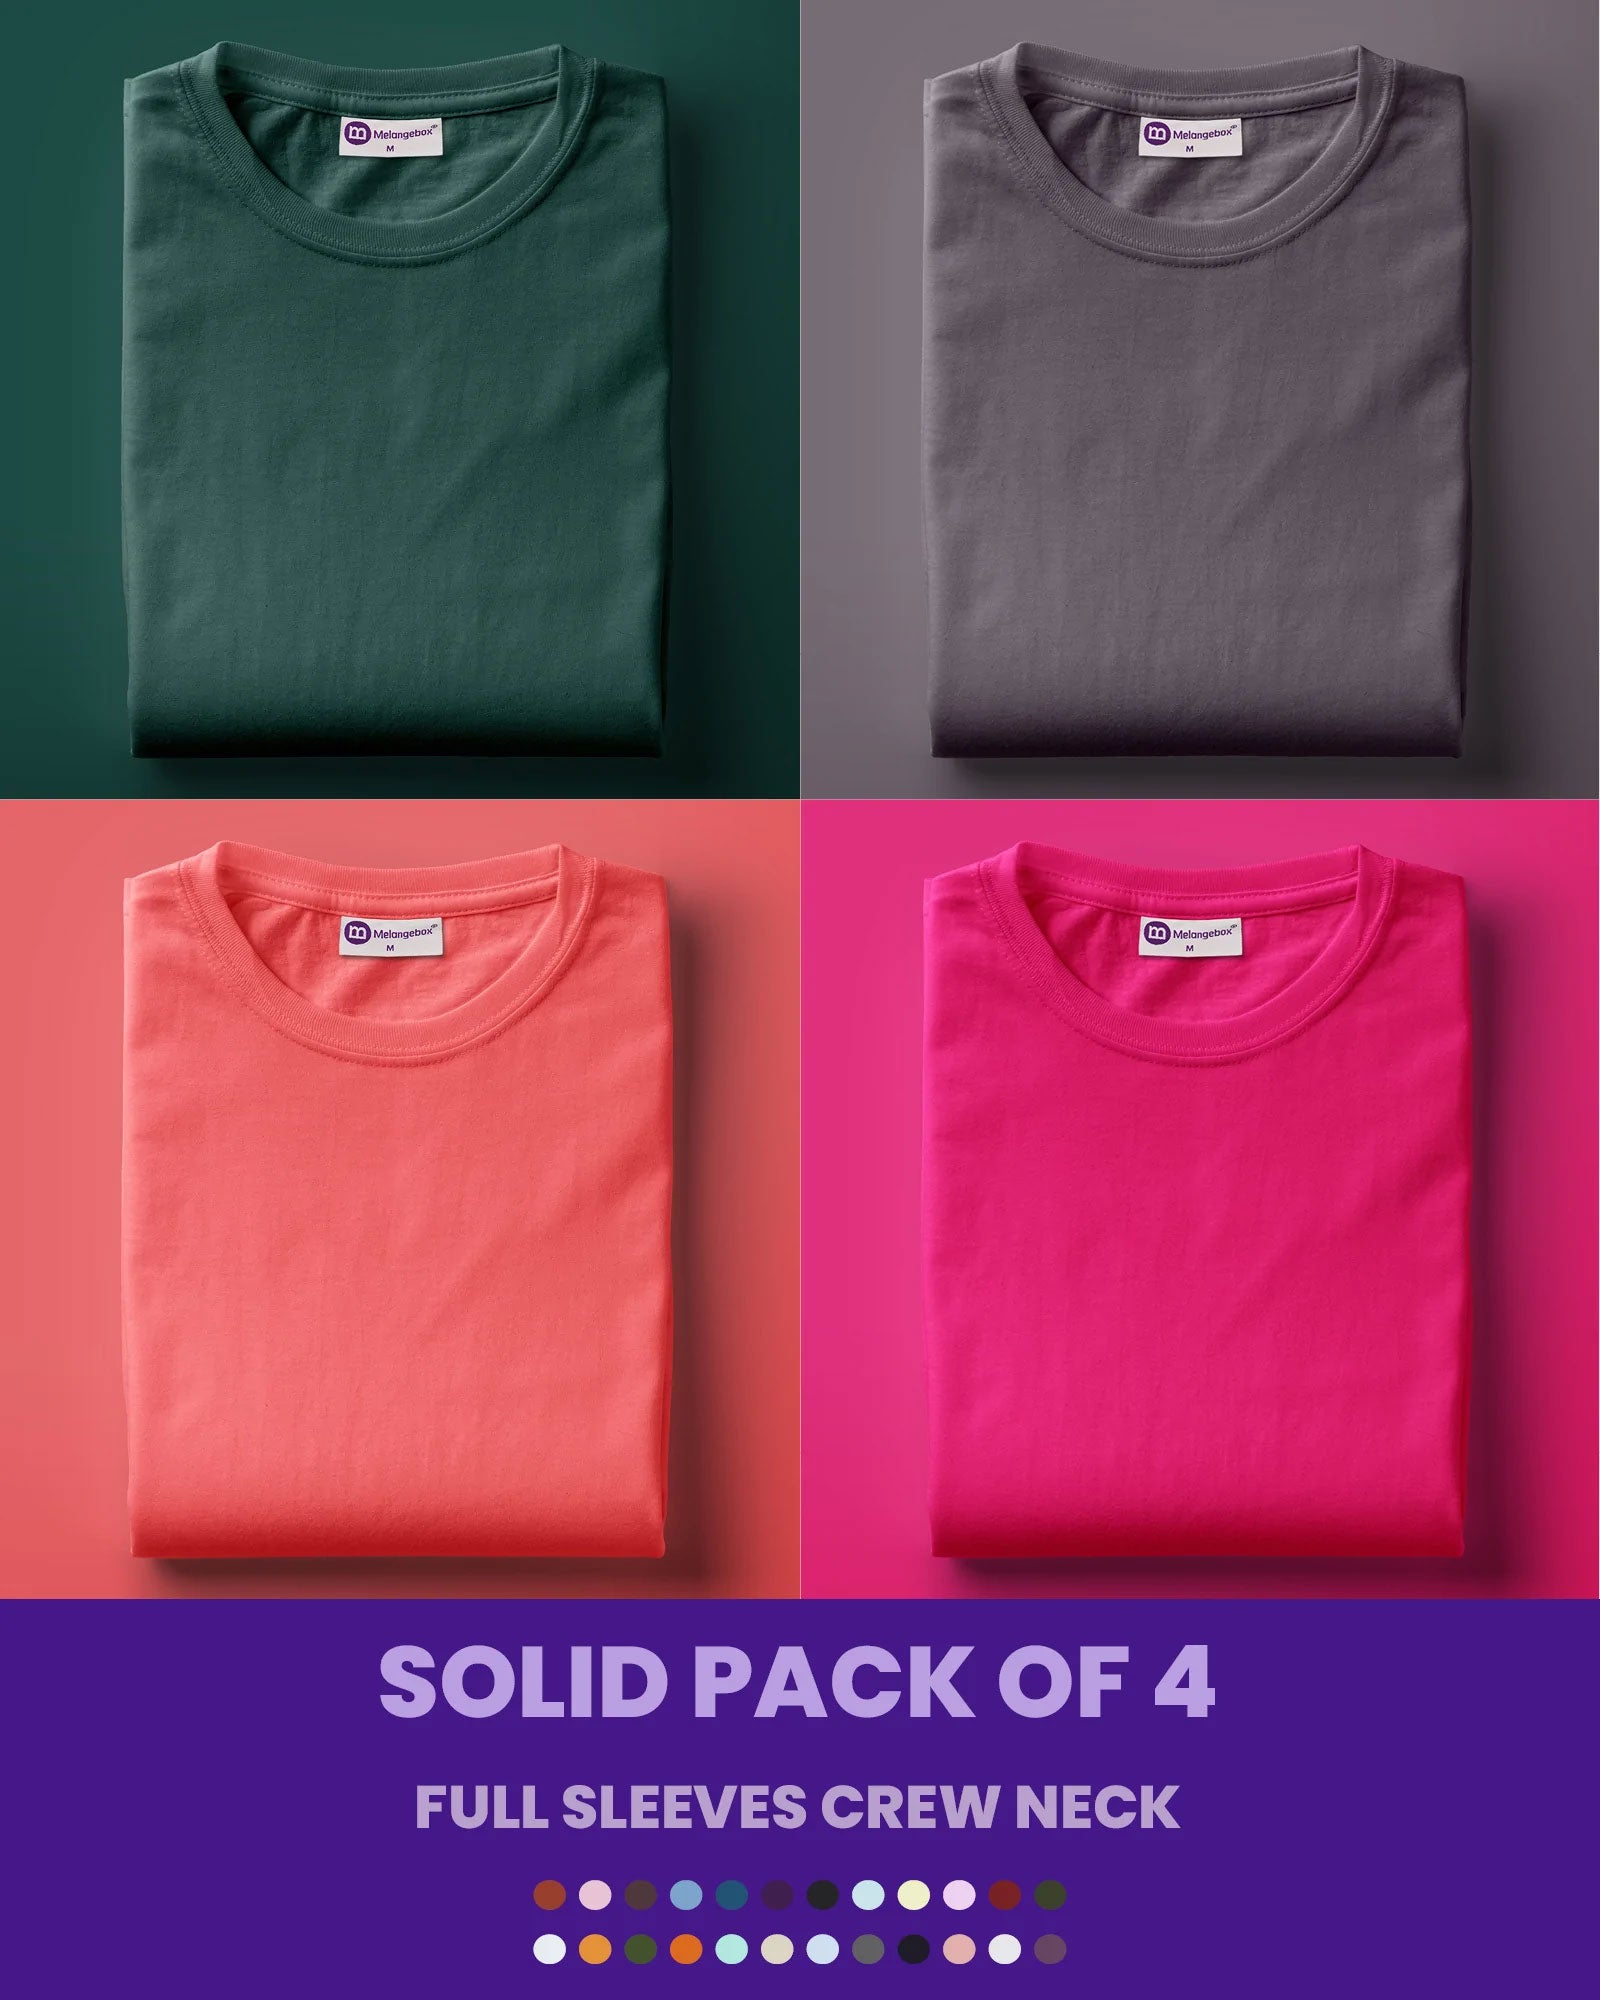 Solid Pack of 4: Full Sleeves Crew Neck